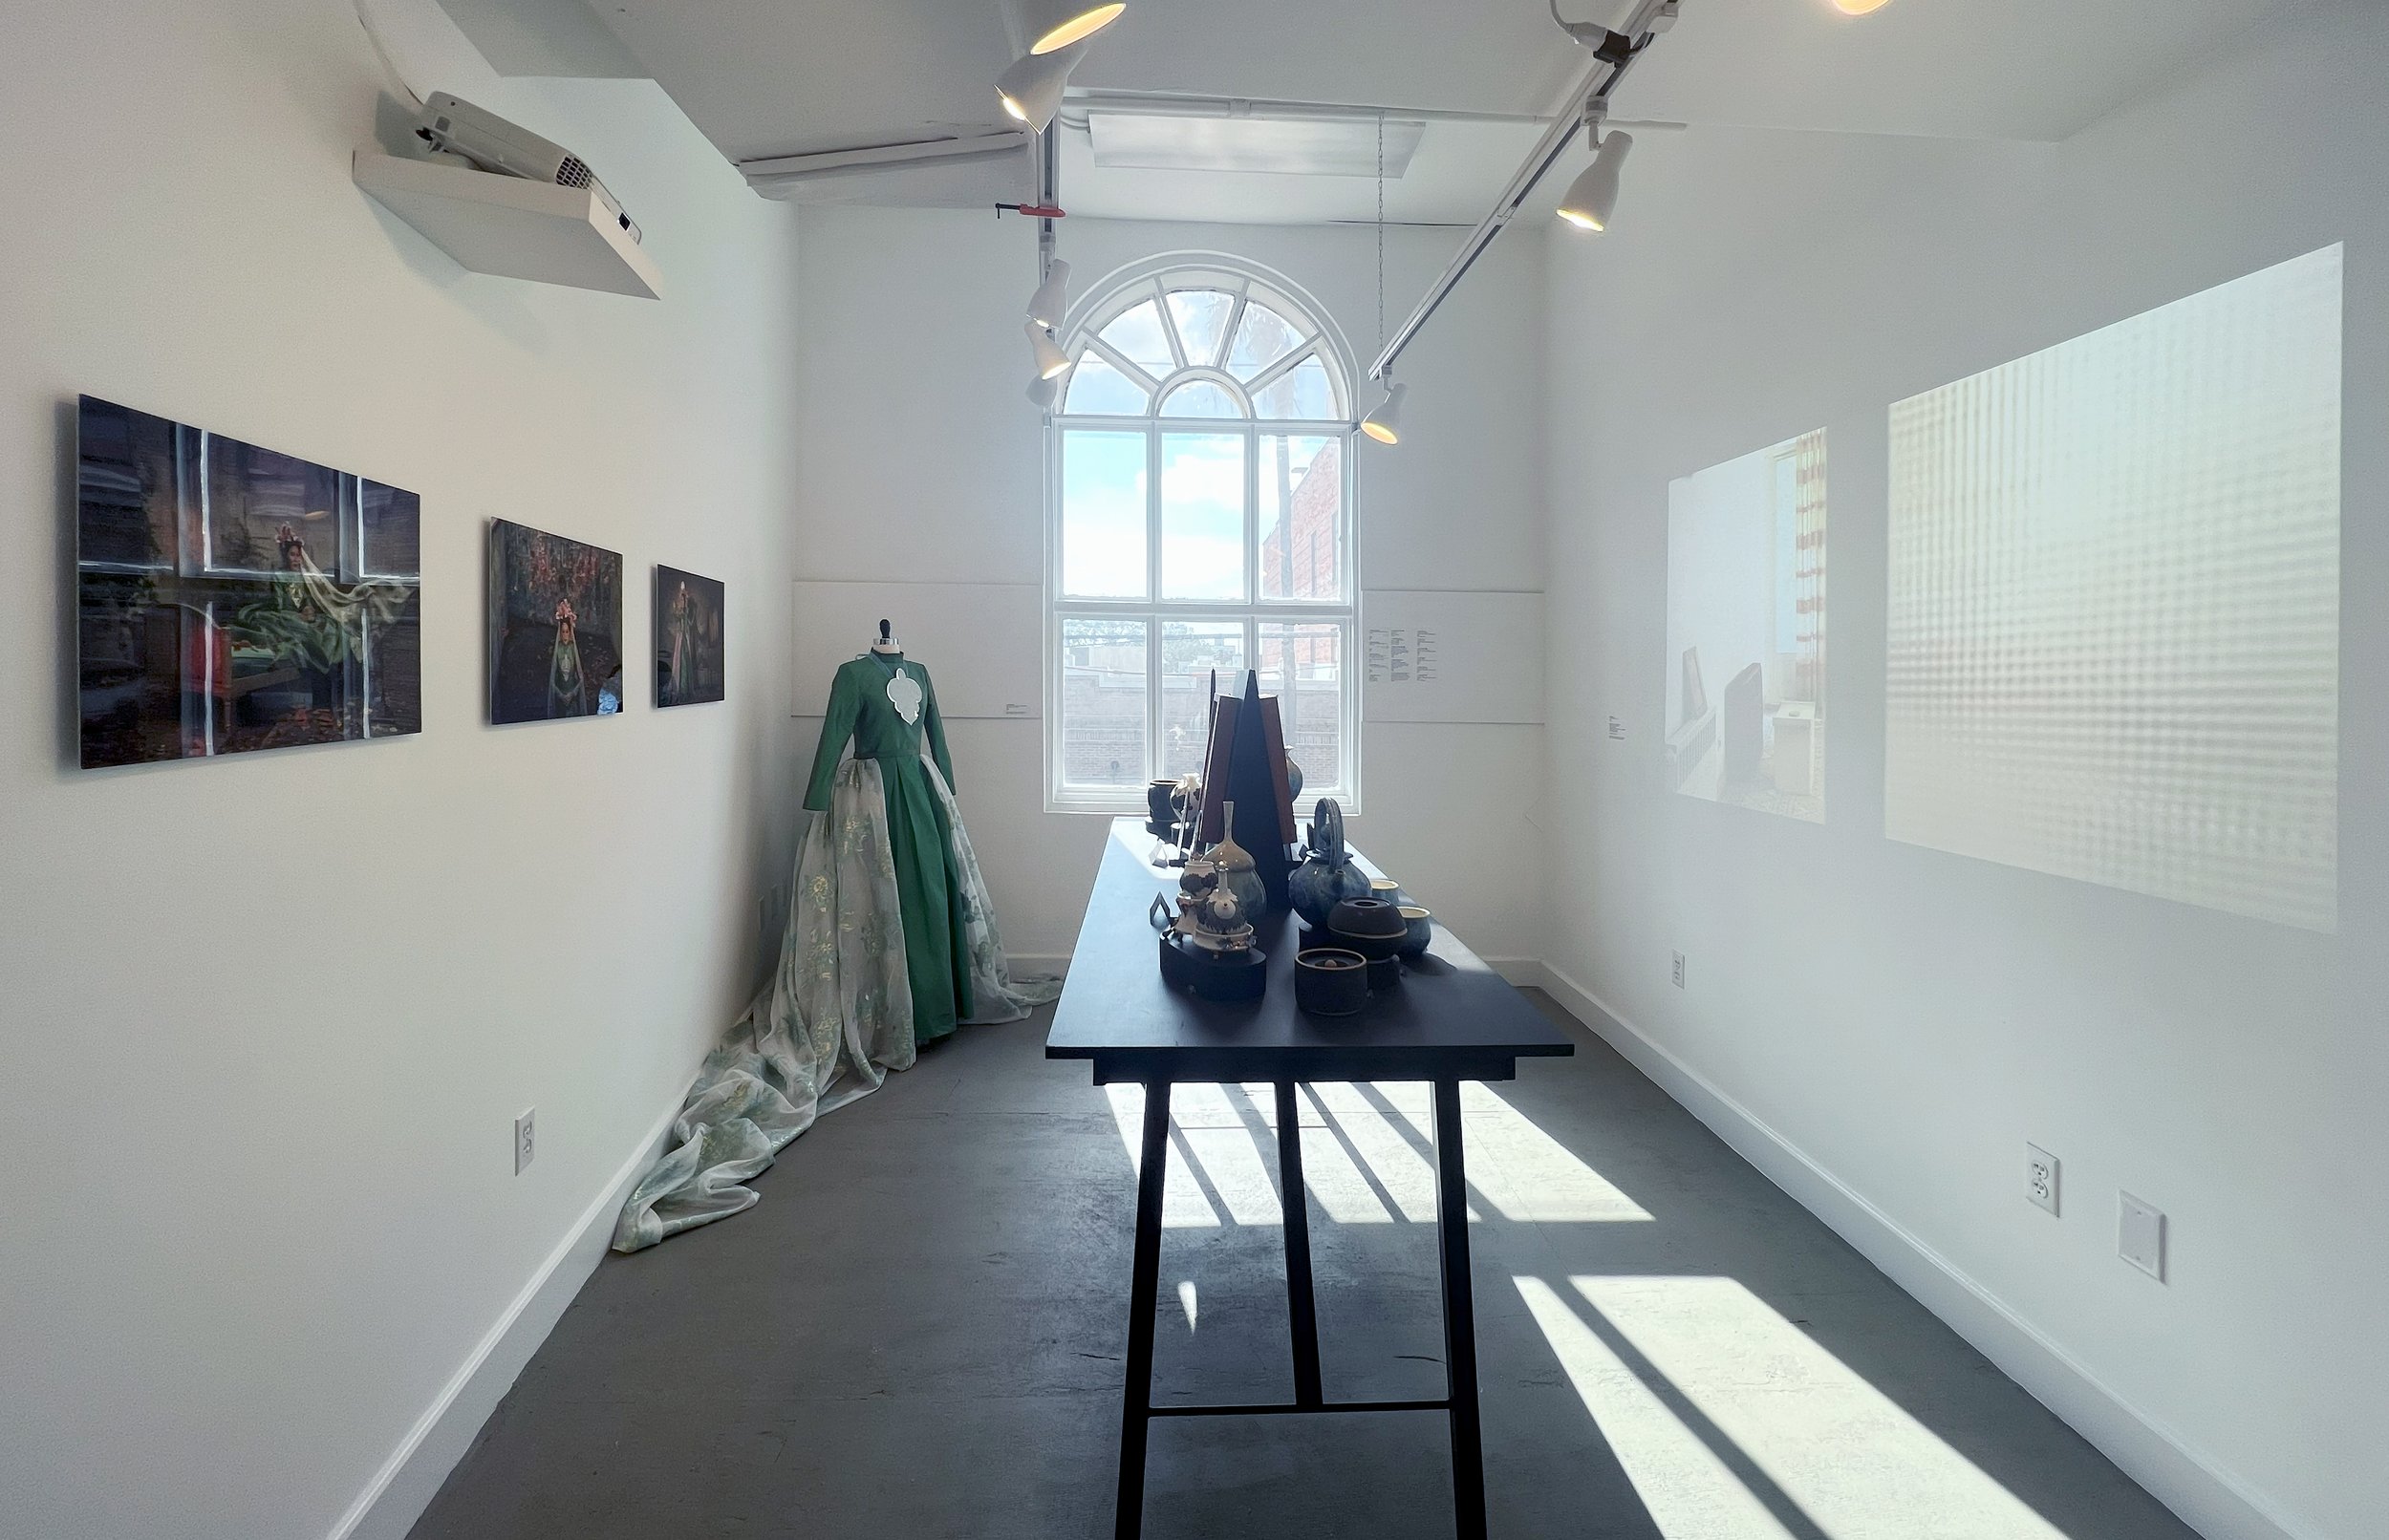 "One and Only" installation view